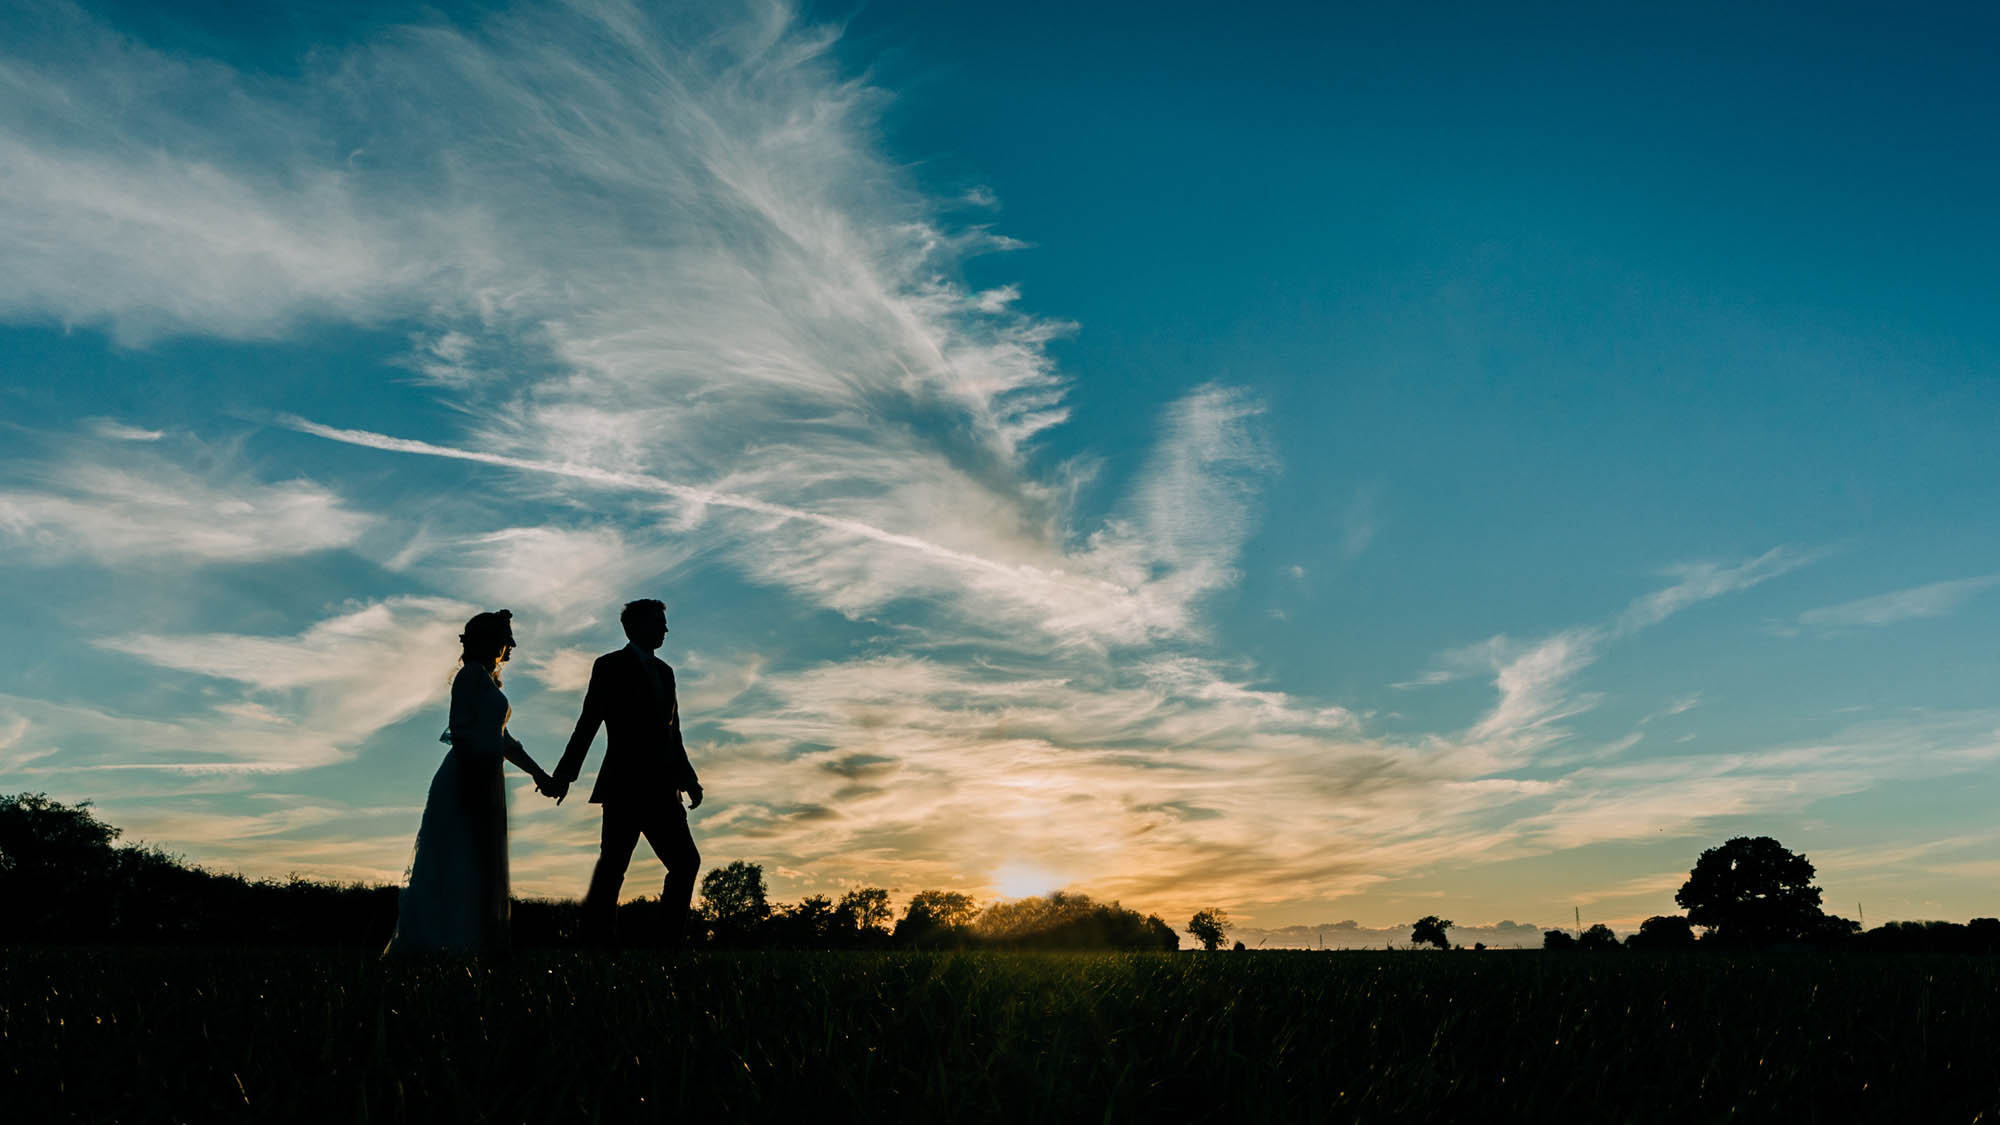 A couple walk along the horizon in the countryside as the sun sets. The sky is blue with vapour trails. By Abraham Photography